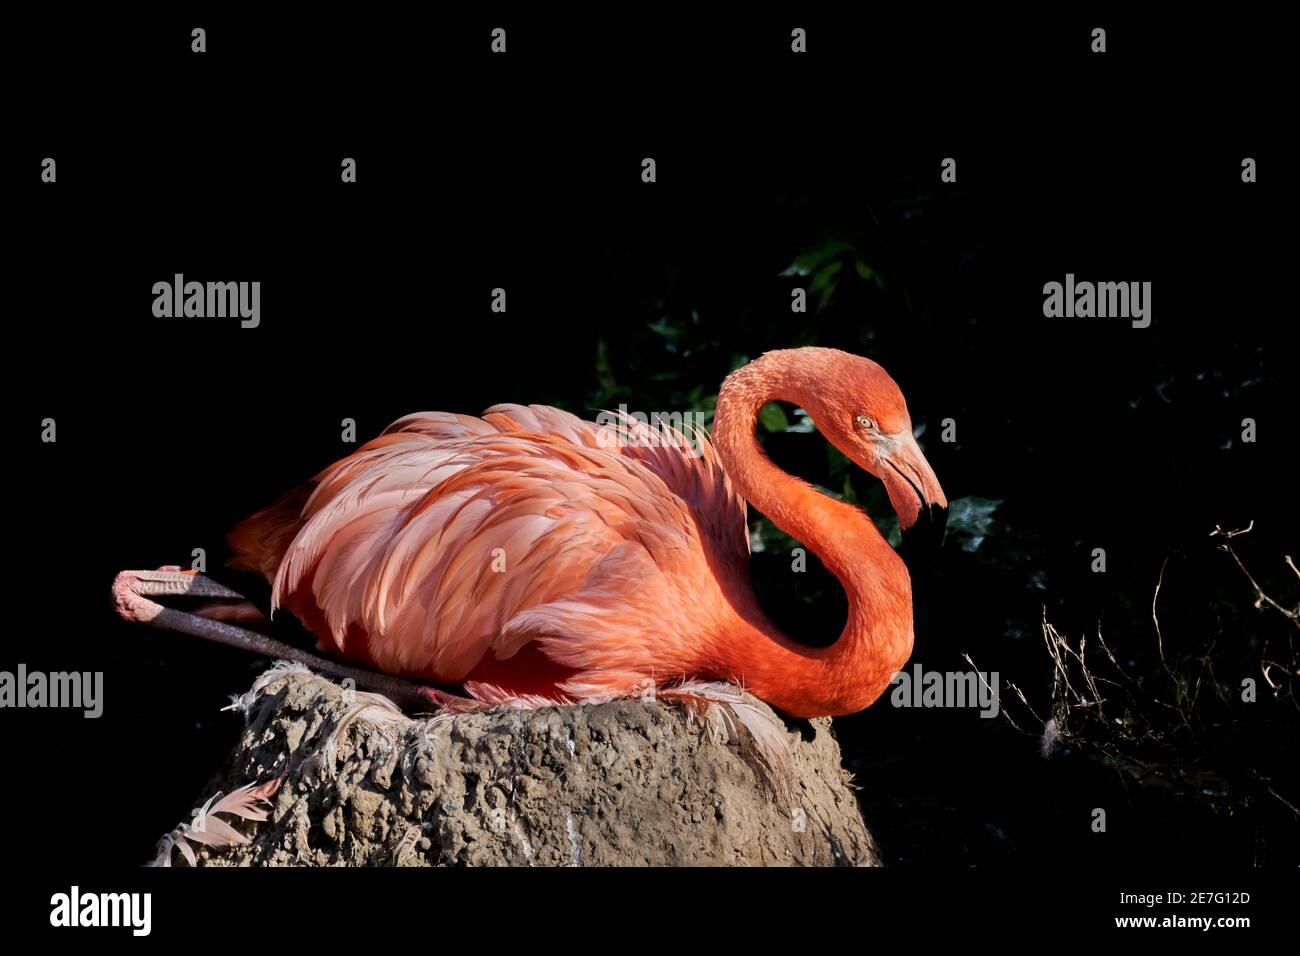 American flamingo, Phoenicopterus ruber, Caribbean flamingo is a tall pink colored bird and lives in north america and Galapagos Islands. Sitting on i Stock Photo